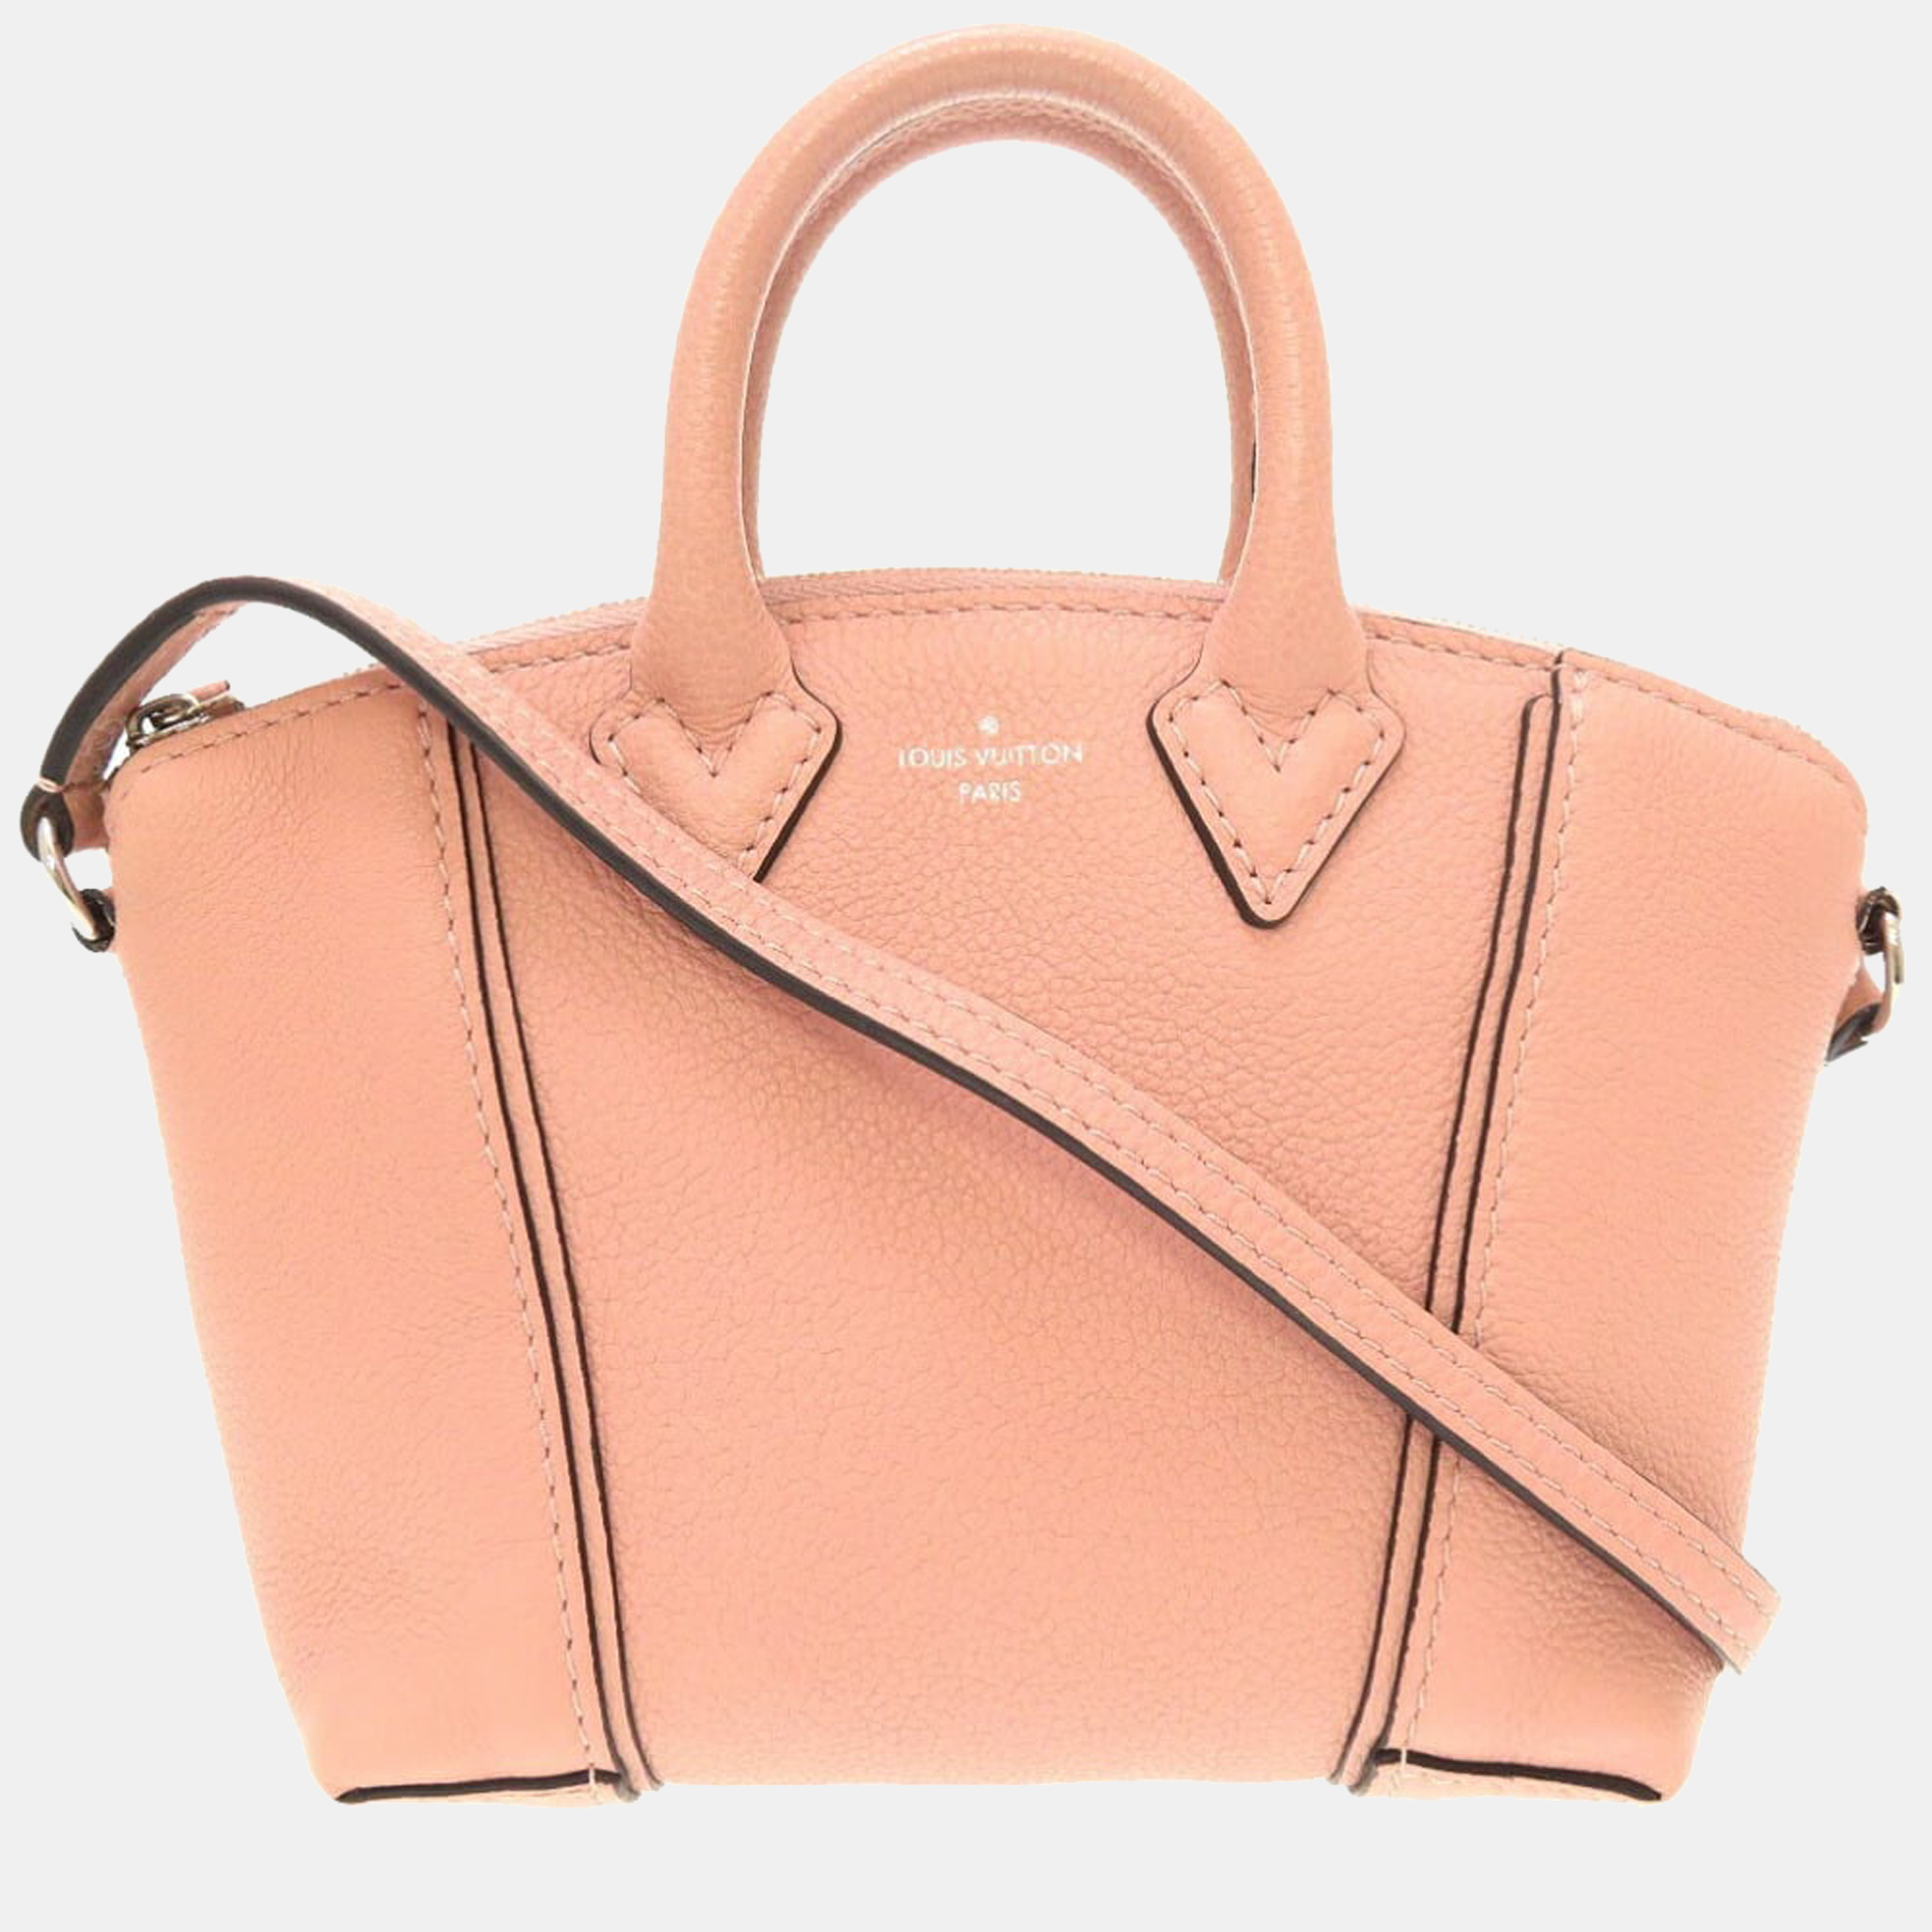 Louis Vuitton Pink Leather Soft Lockit Tote Bag